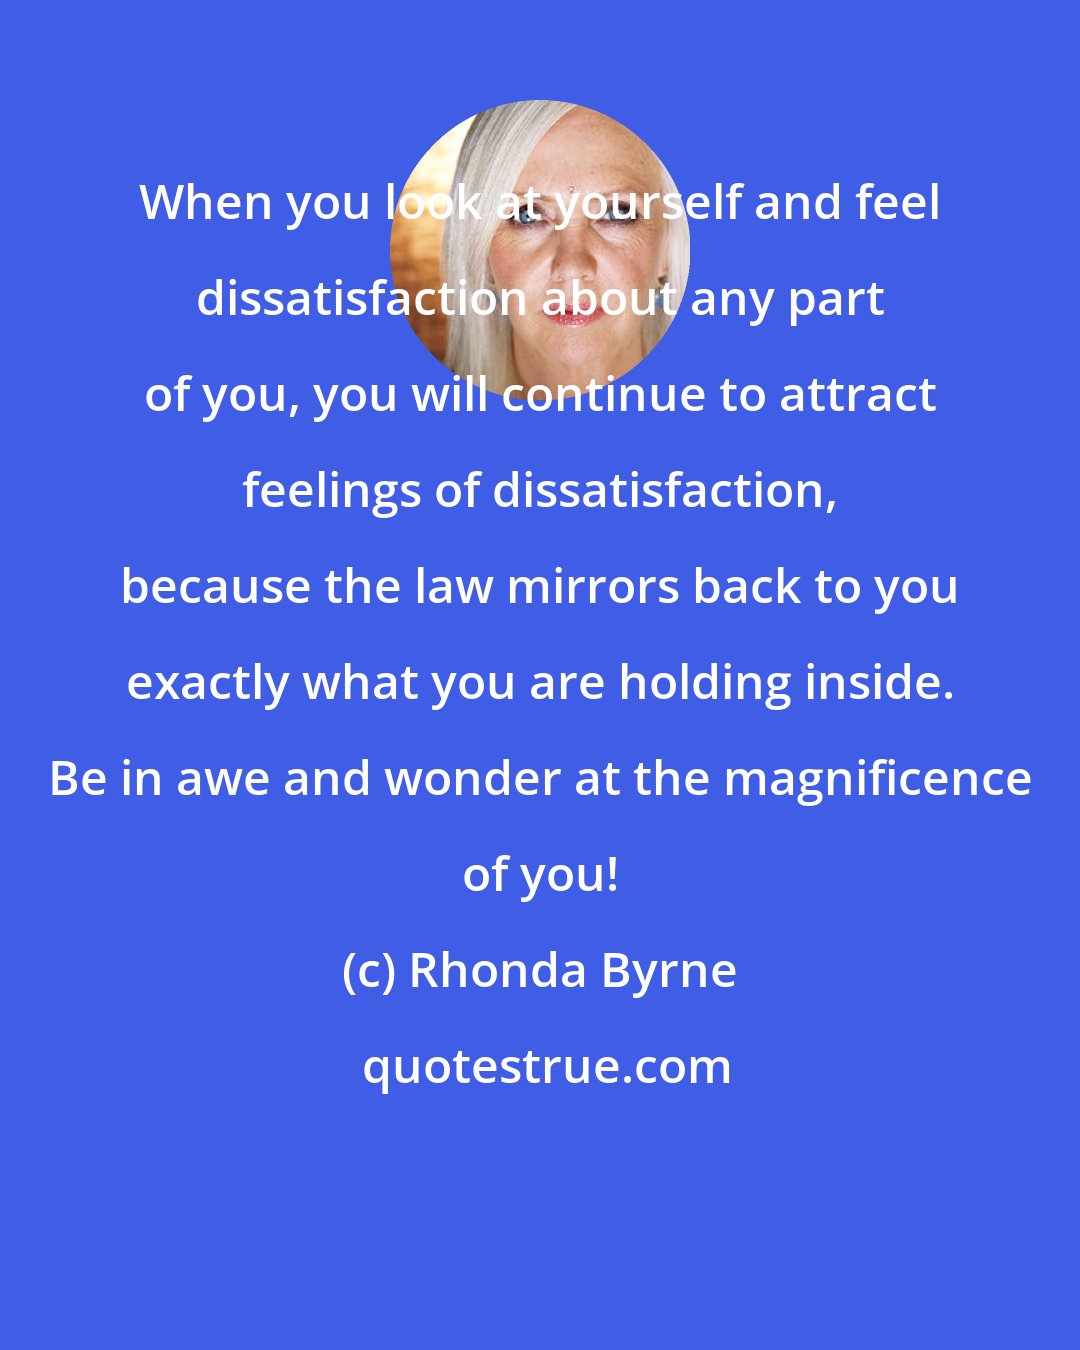 Rhonda Byrne: When you look at yourself and feel dissatisfaction about any part of you, you will continue to attract feelings of dissatisfaction, because the law mirrors back to you exactly what you are holding inside. Be in awe and wonder at the magnificence of you!